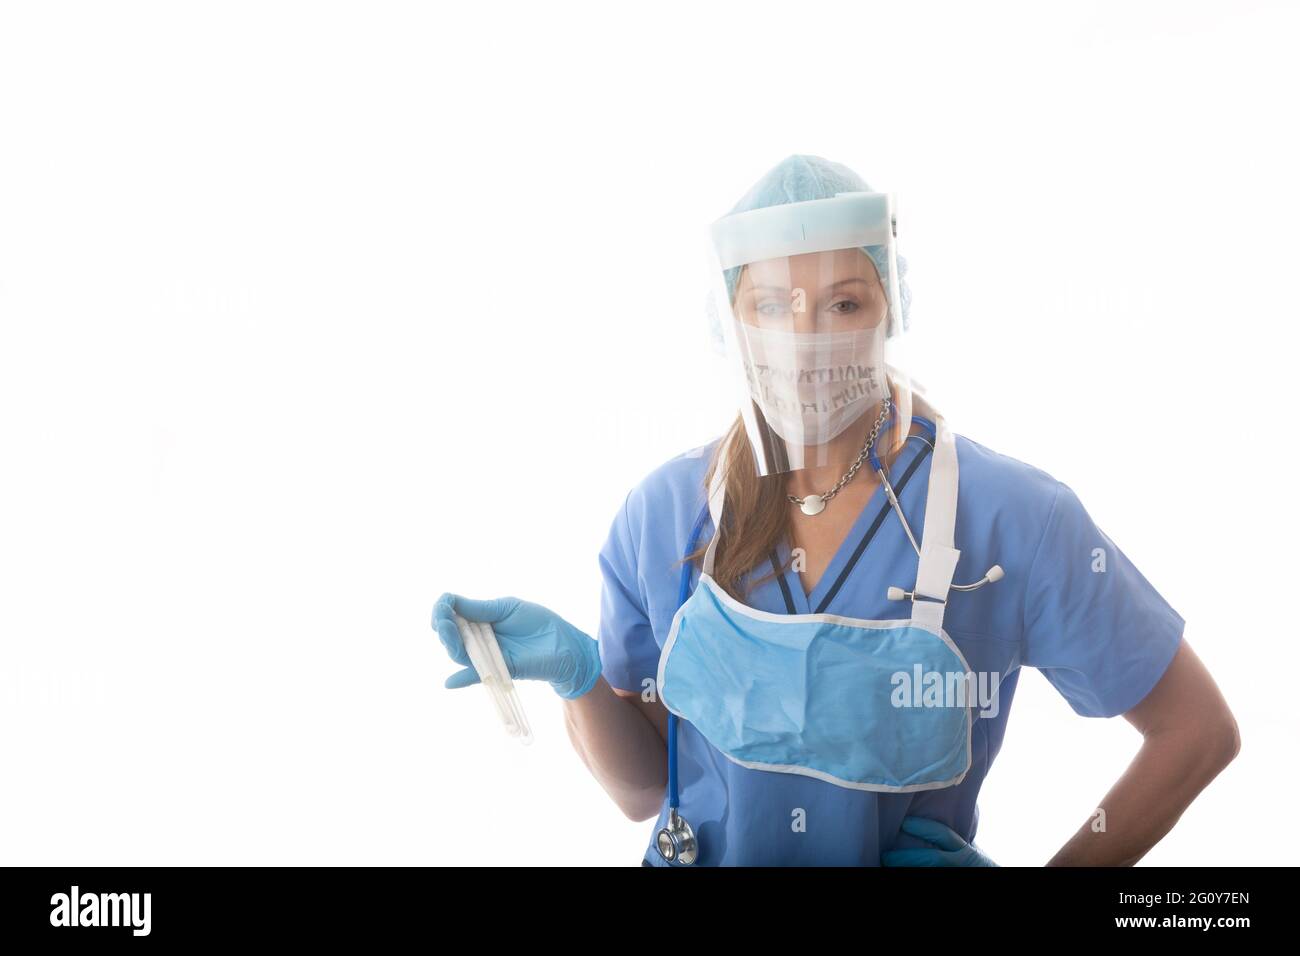 Pathologist or nurse ready to take swabs for COVID-19 or influenza pandemic Stock Photo